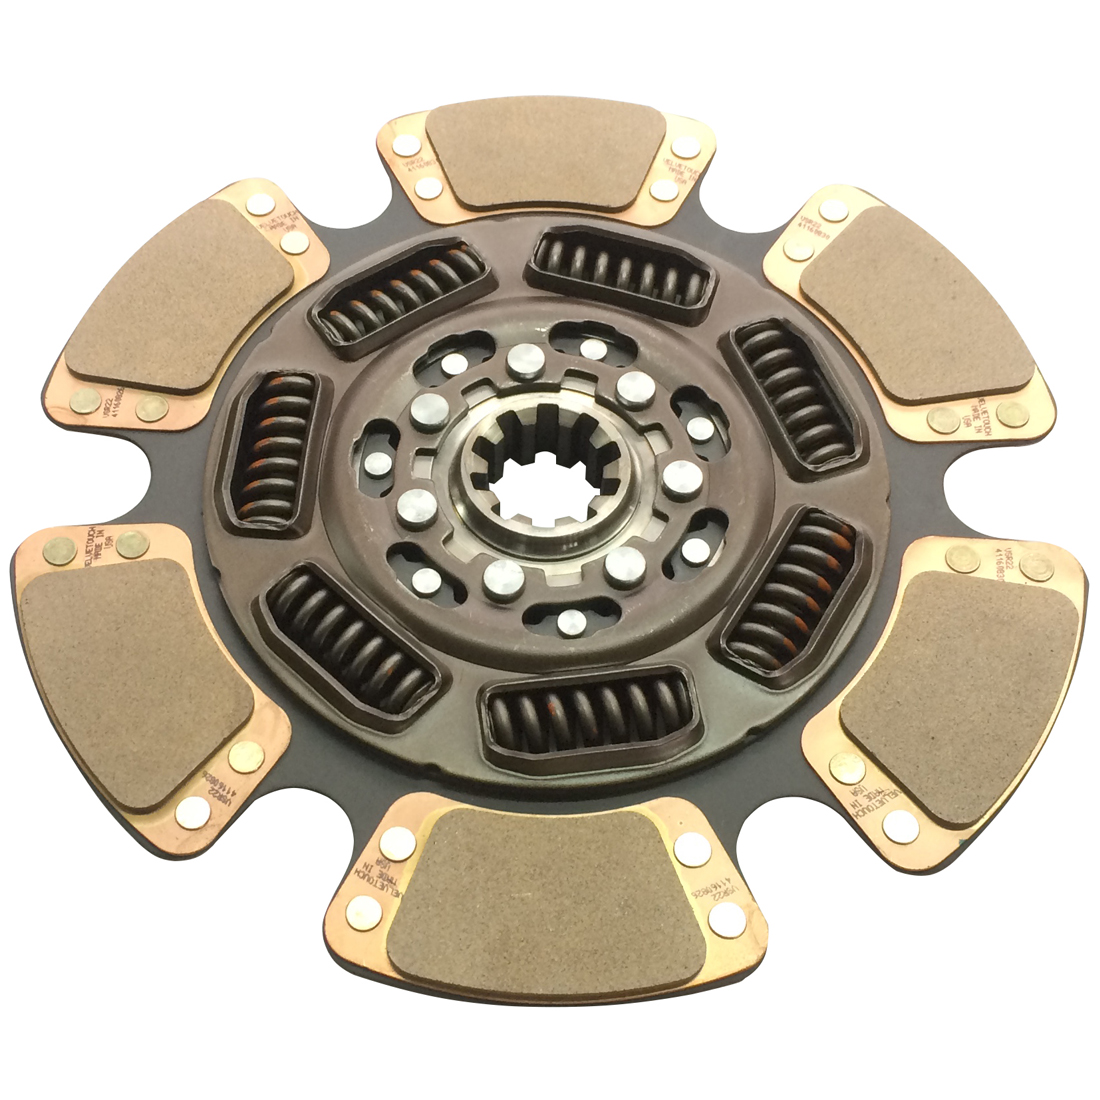 OEM 15-1/2 "x 10T x 2" Terbon Heavy Duty Truck Drive System Parts 6 Paddle 7 Springs 128709 Clutch Disc Kit